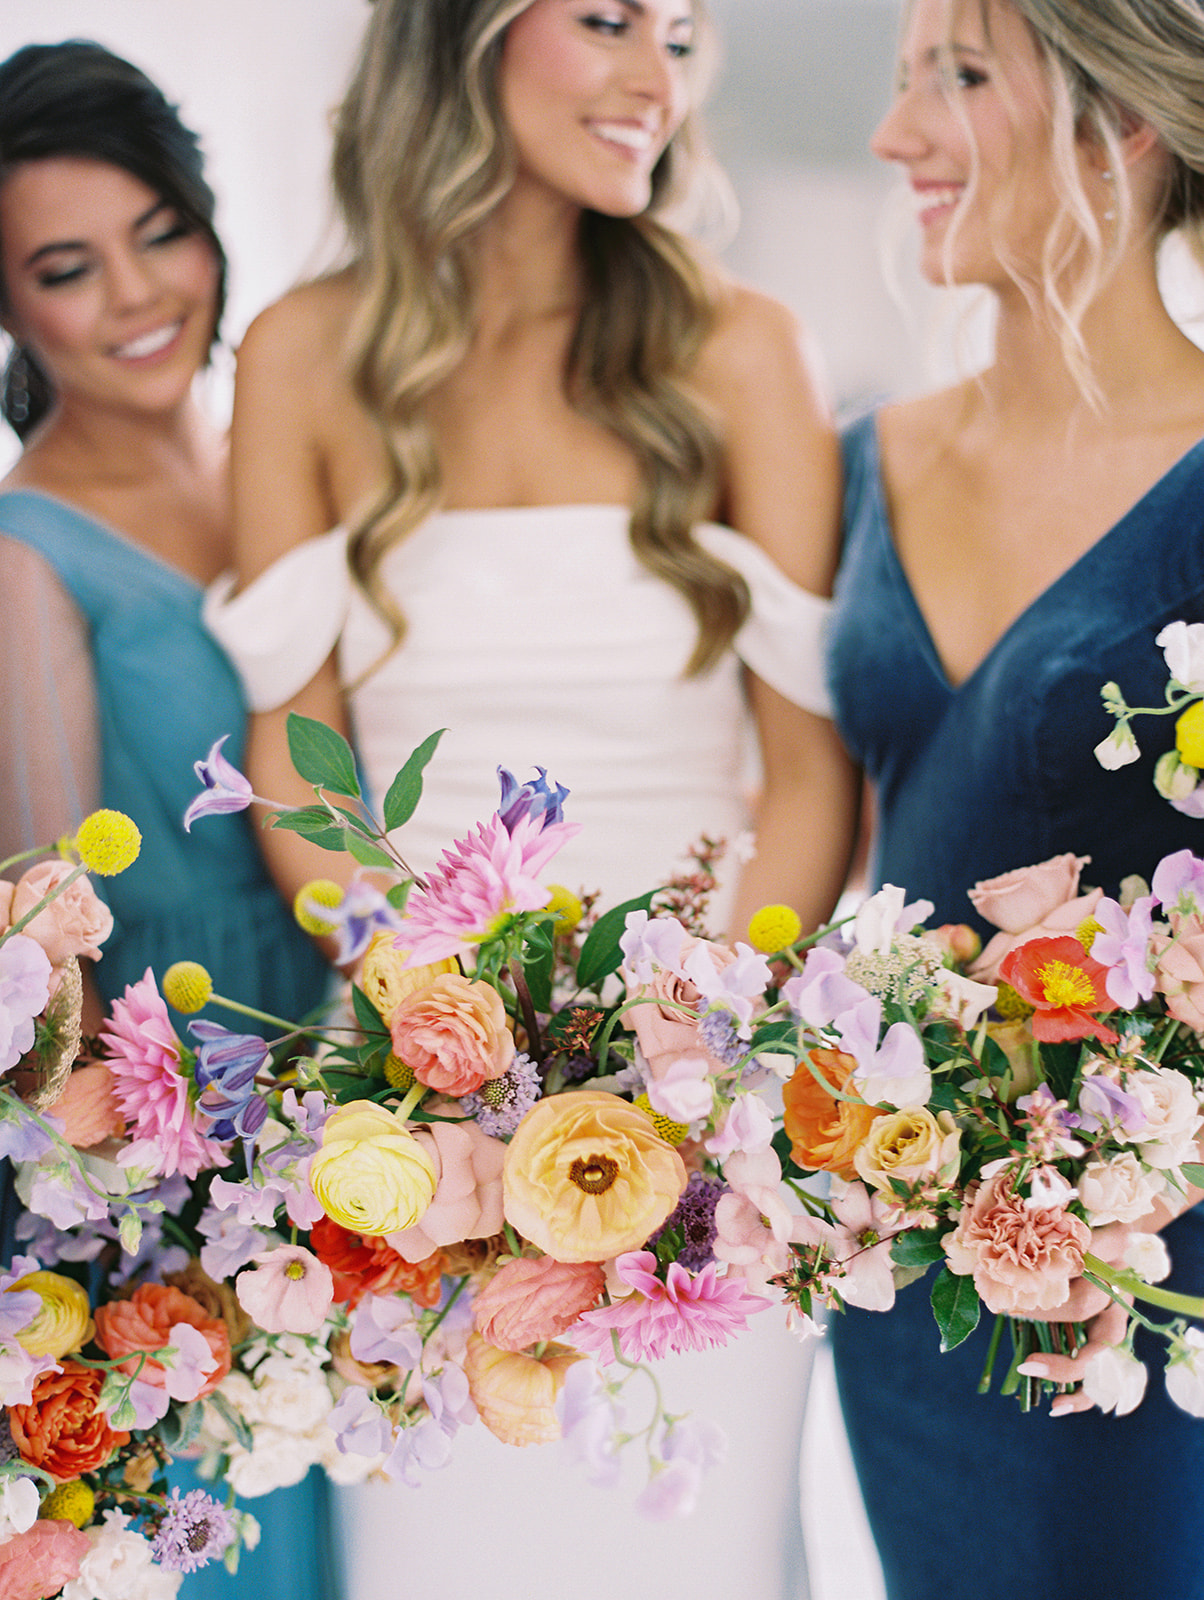 Whimsical wedding bouquets